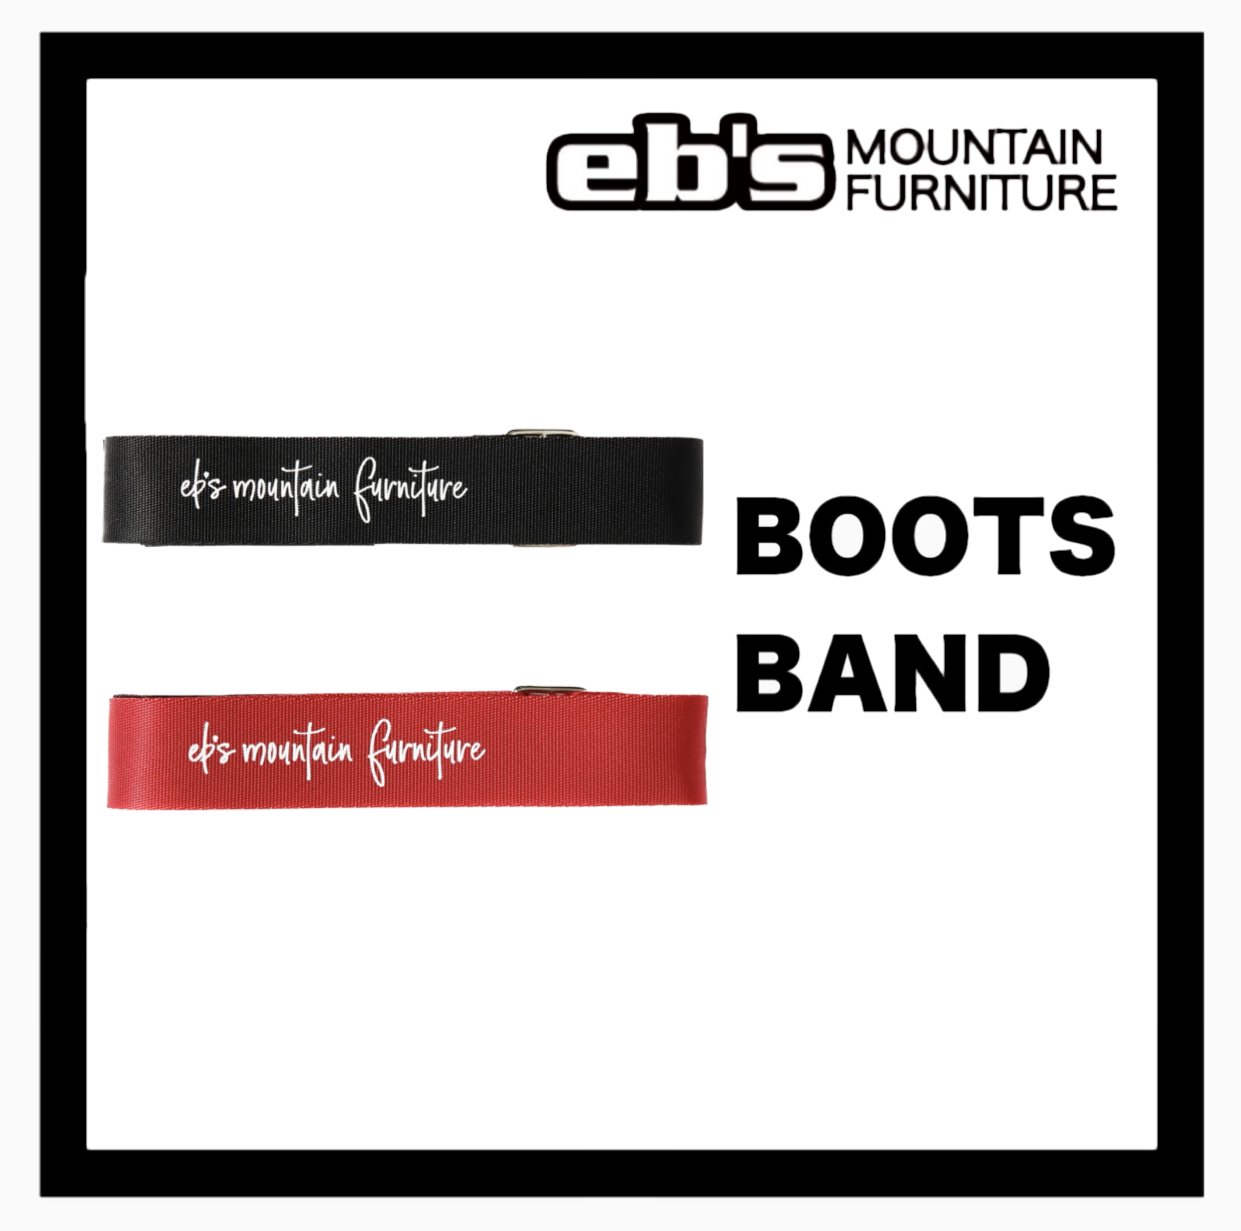 <img class='new_mark_img1' src='https://img.shop-pro.jp/img/new/icons35.gif' style='border:none;display:inline;margin:0px;padding:0px;width:auto;' />eb'sBOOTS BAND